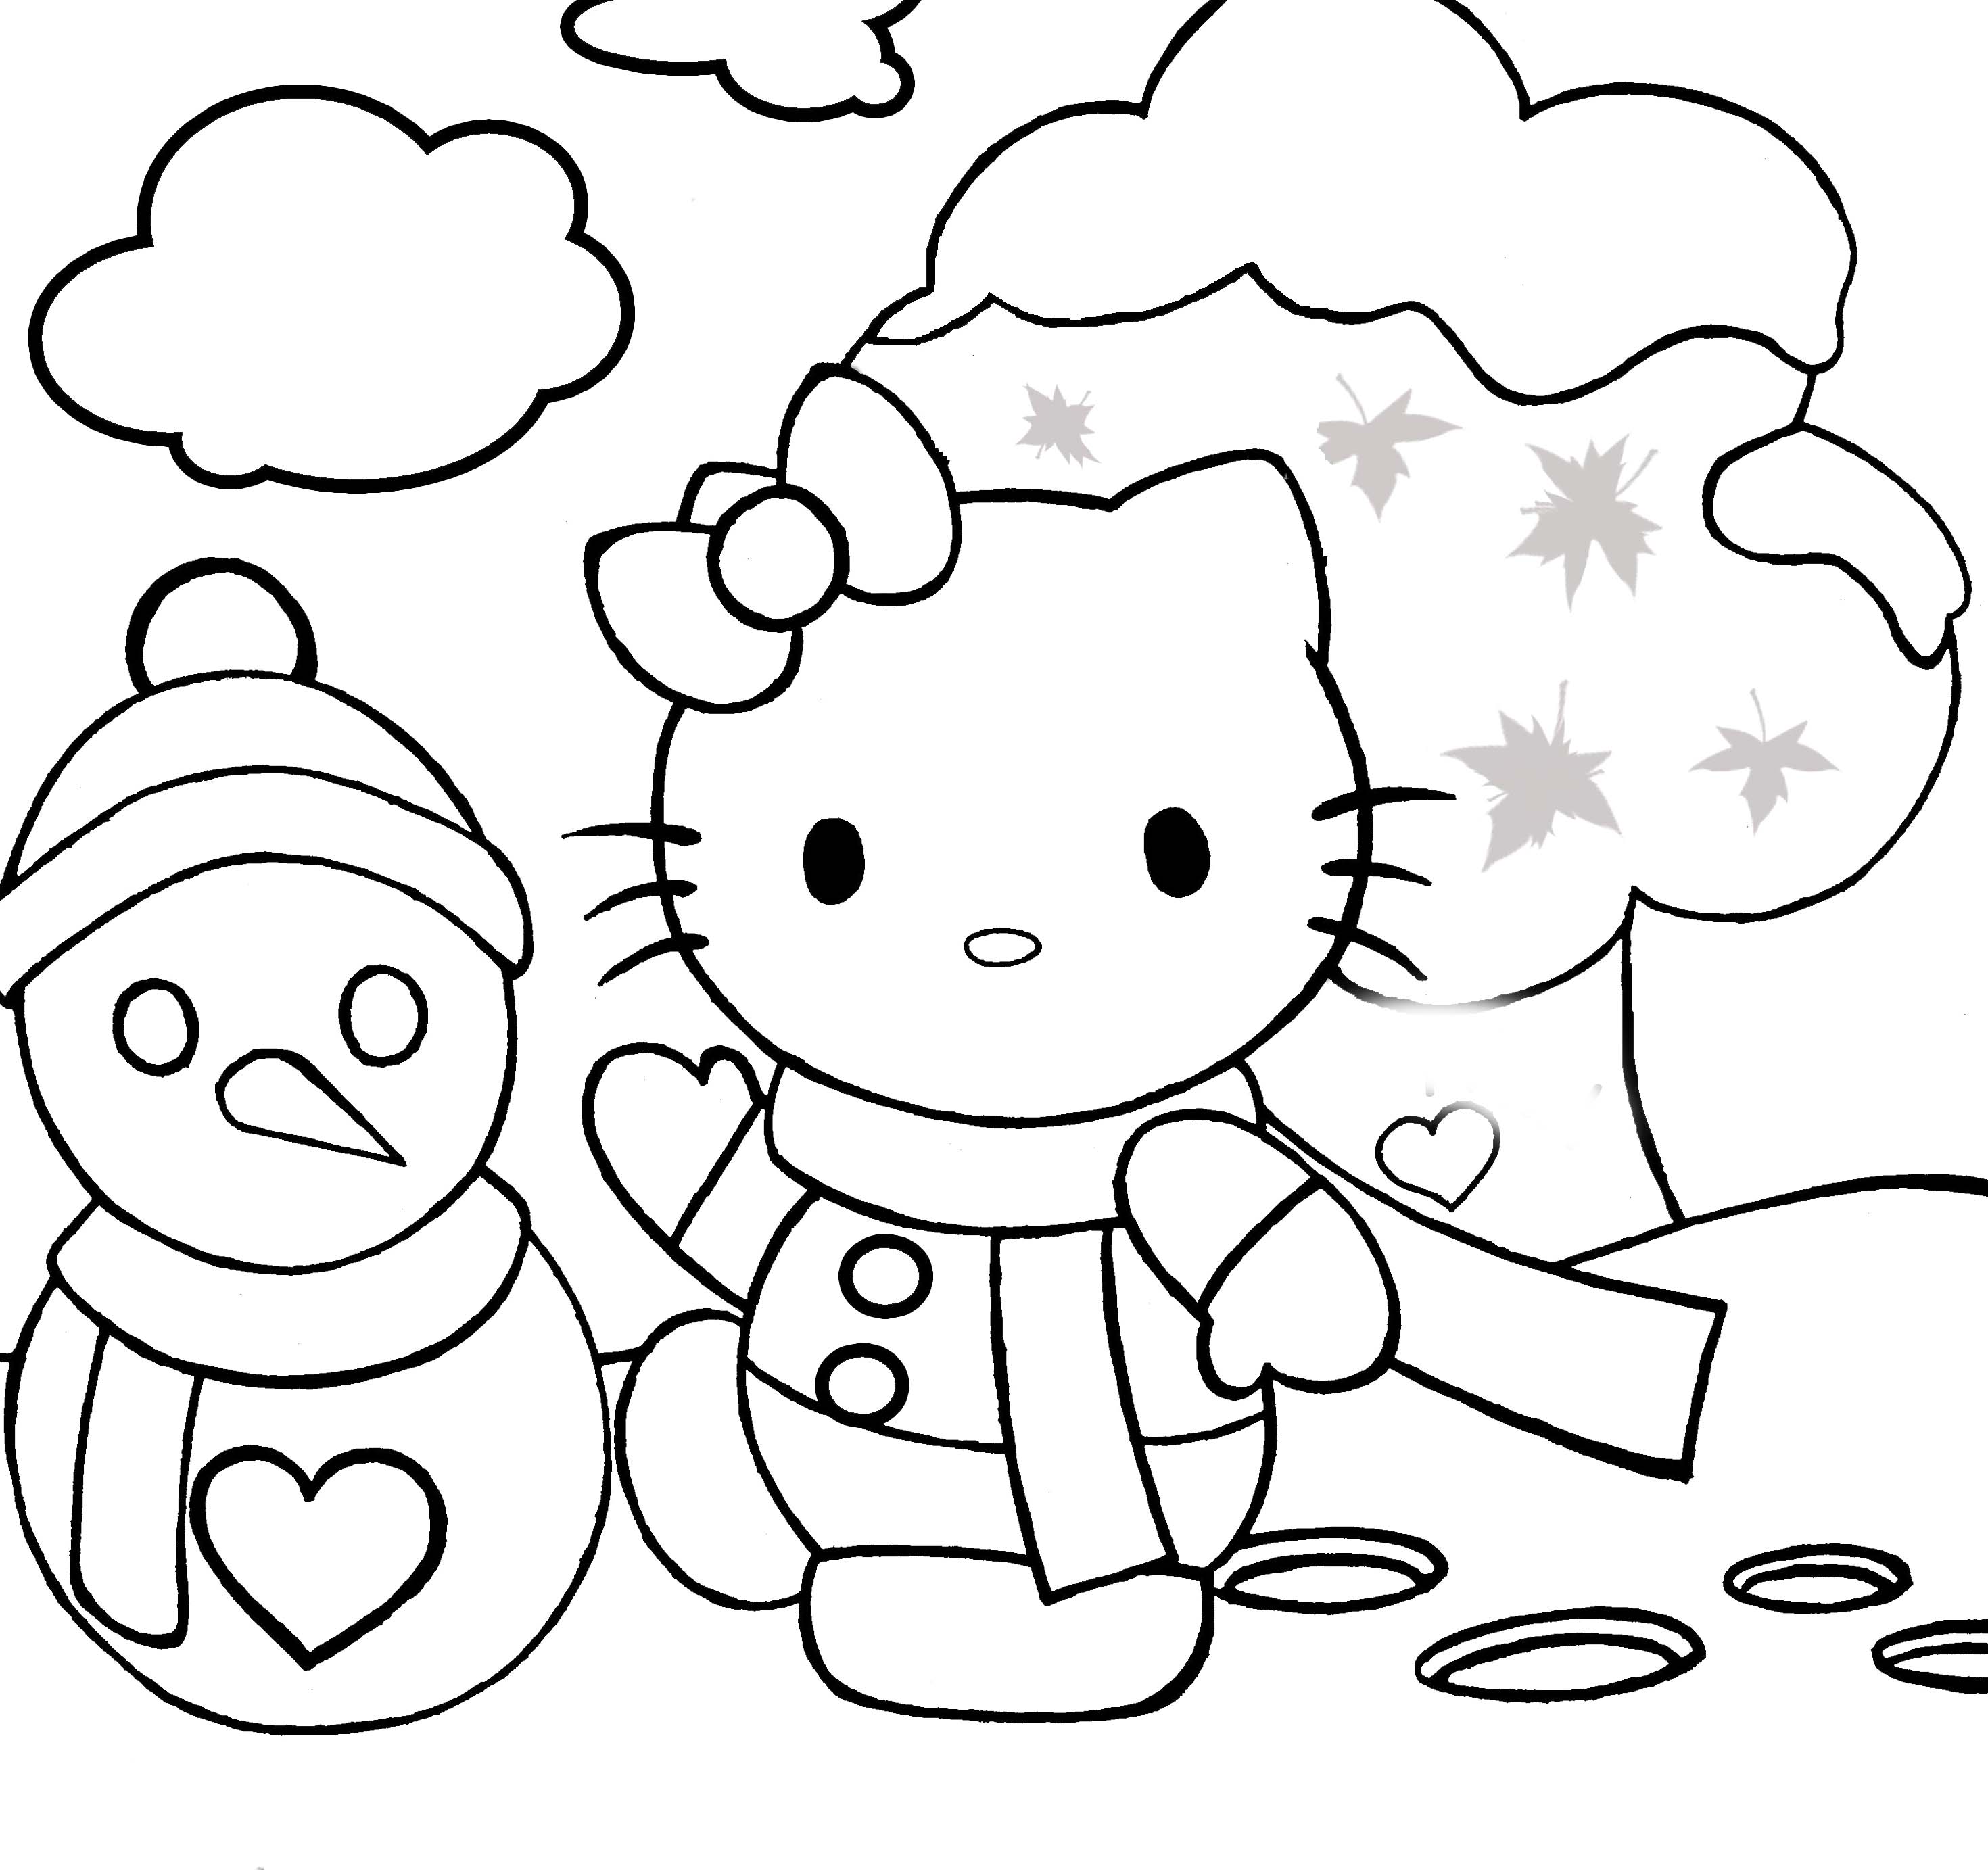 snow-day-coloring-page-at-getcolorings-free-printable-colorings